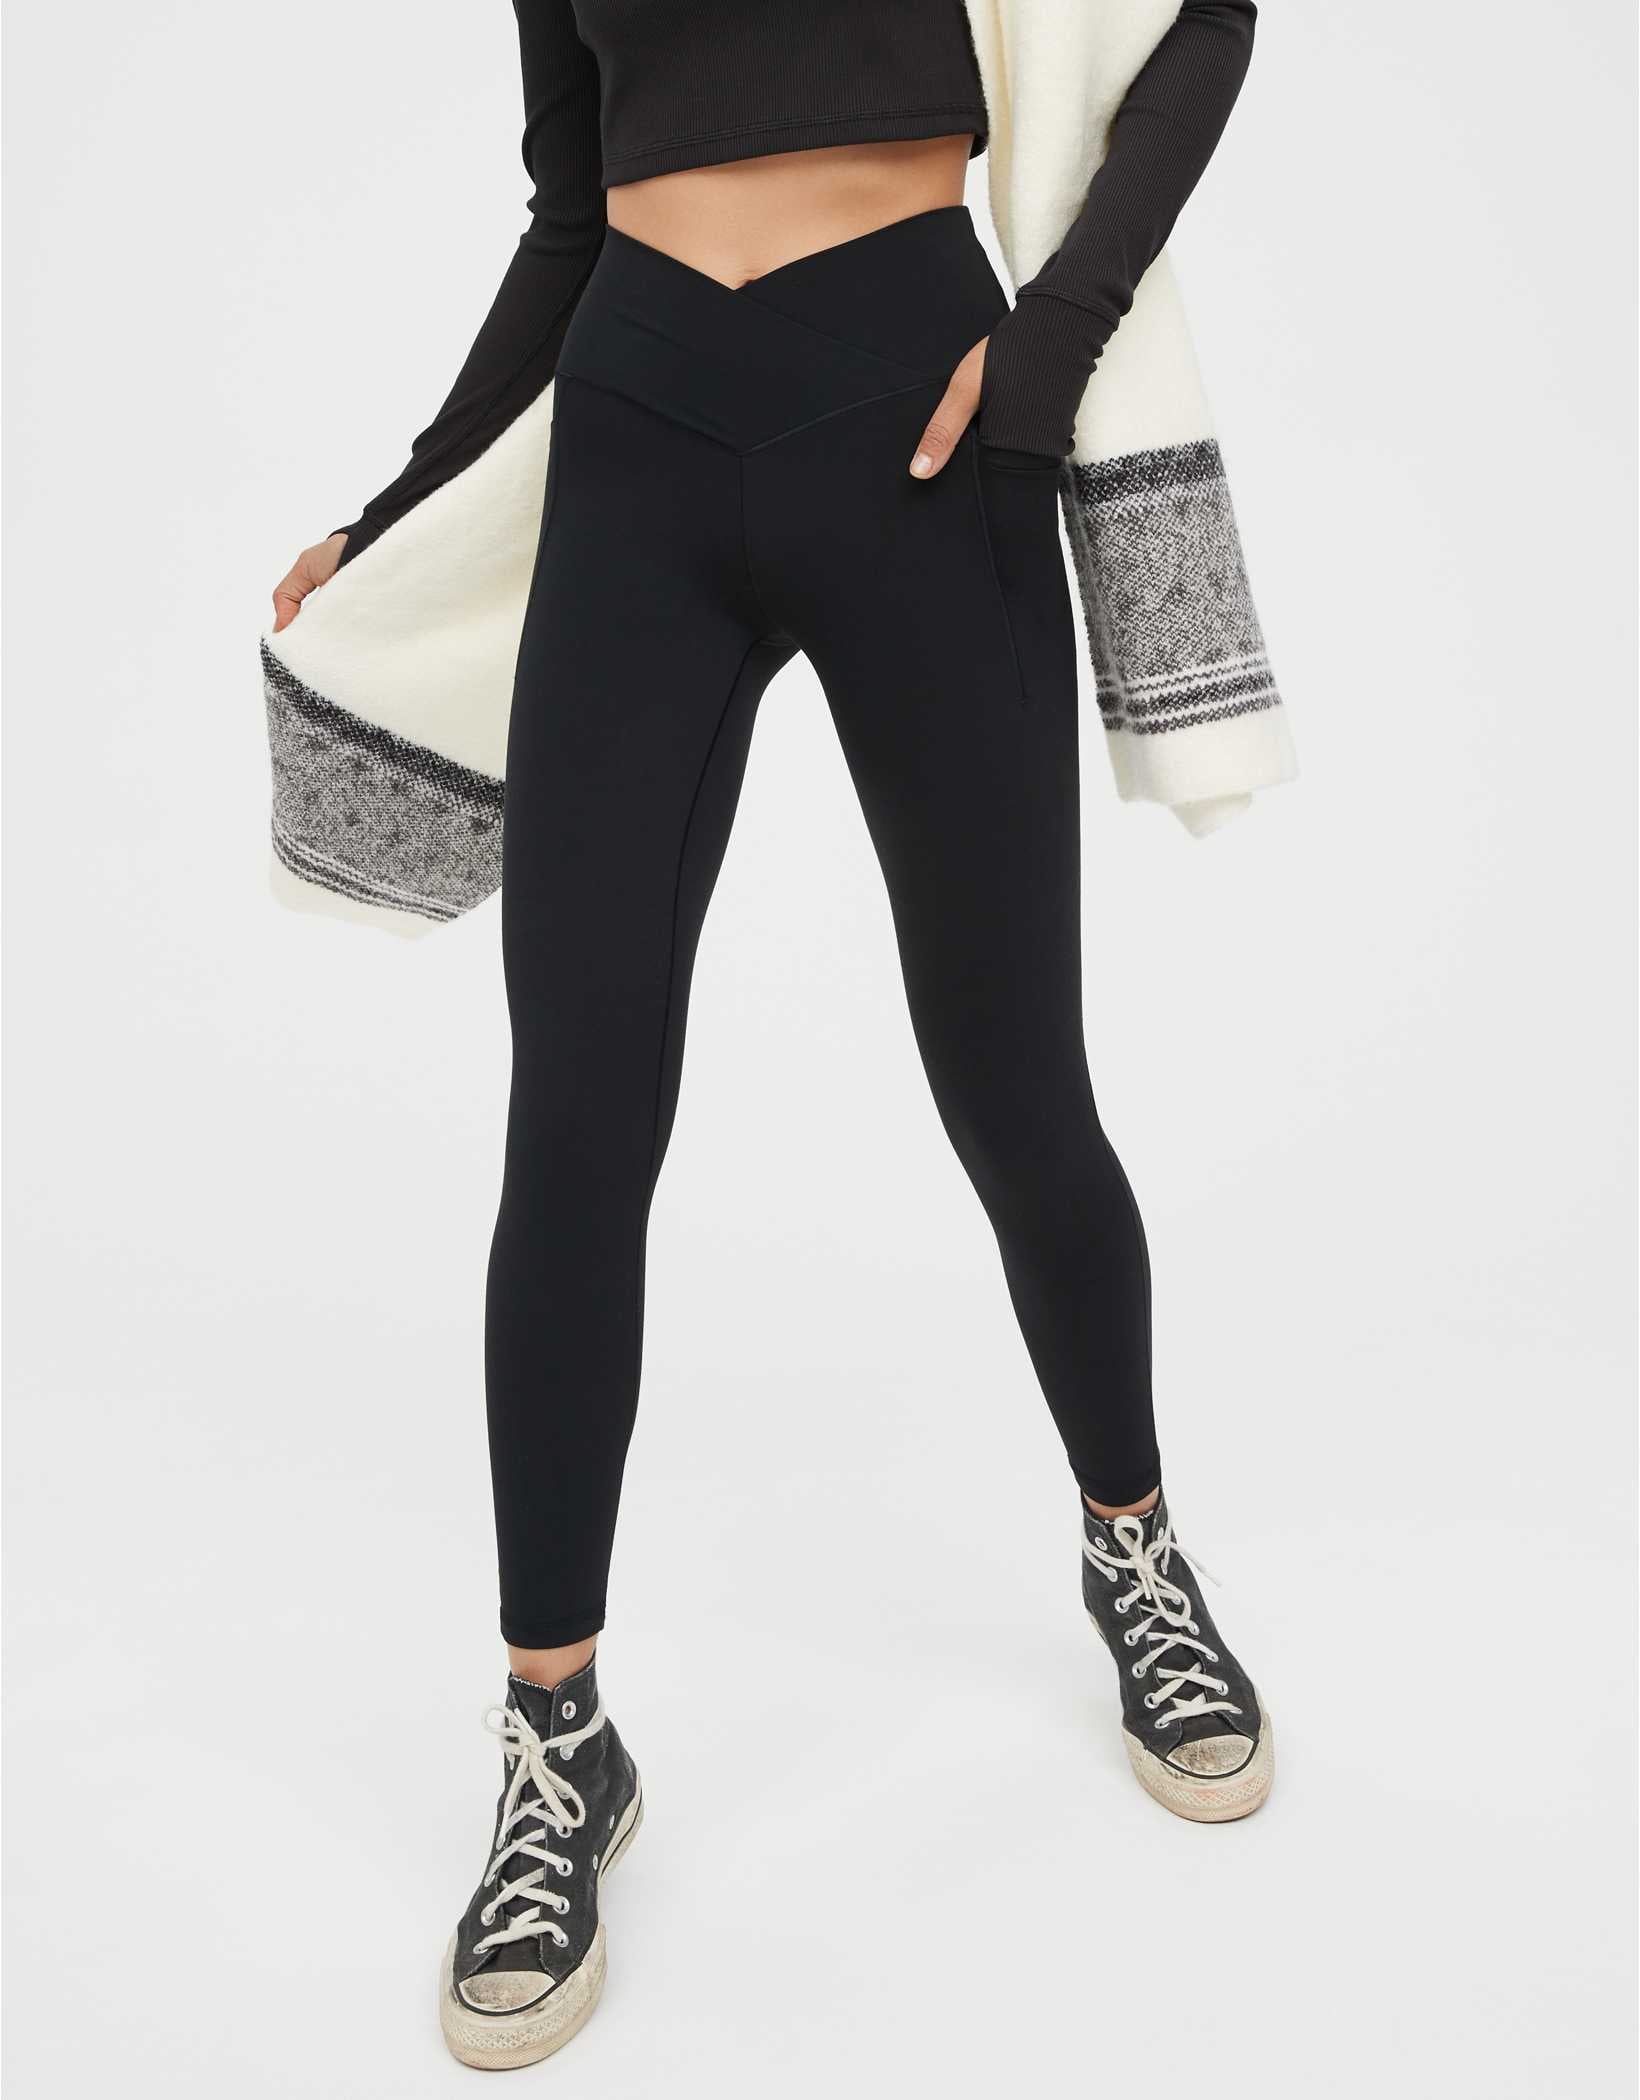 19 Best Leggings on  for Women in 2022: Running, Hiking, Lounging,  and Workout Options